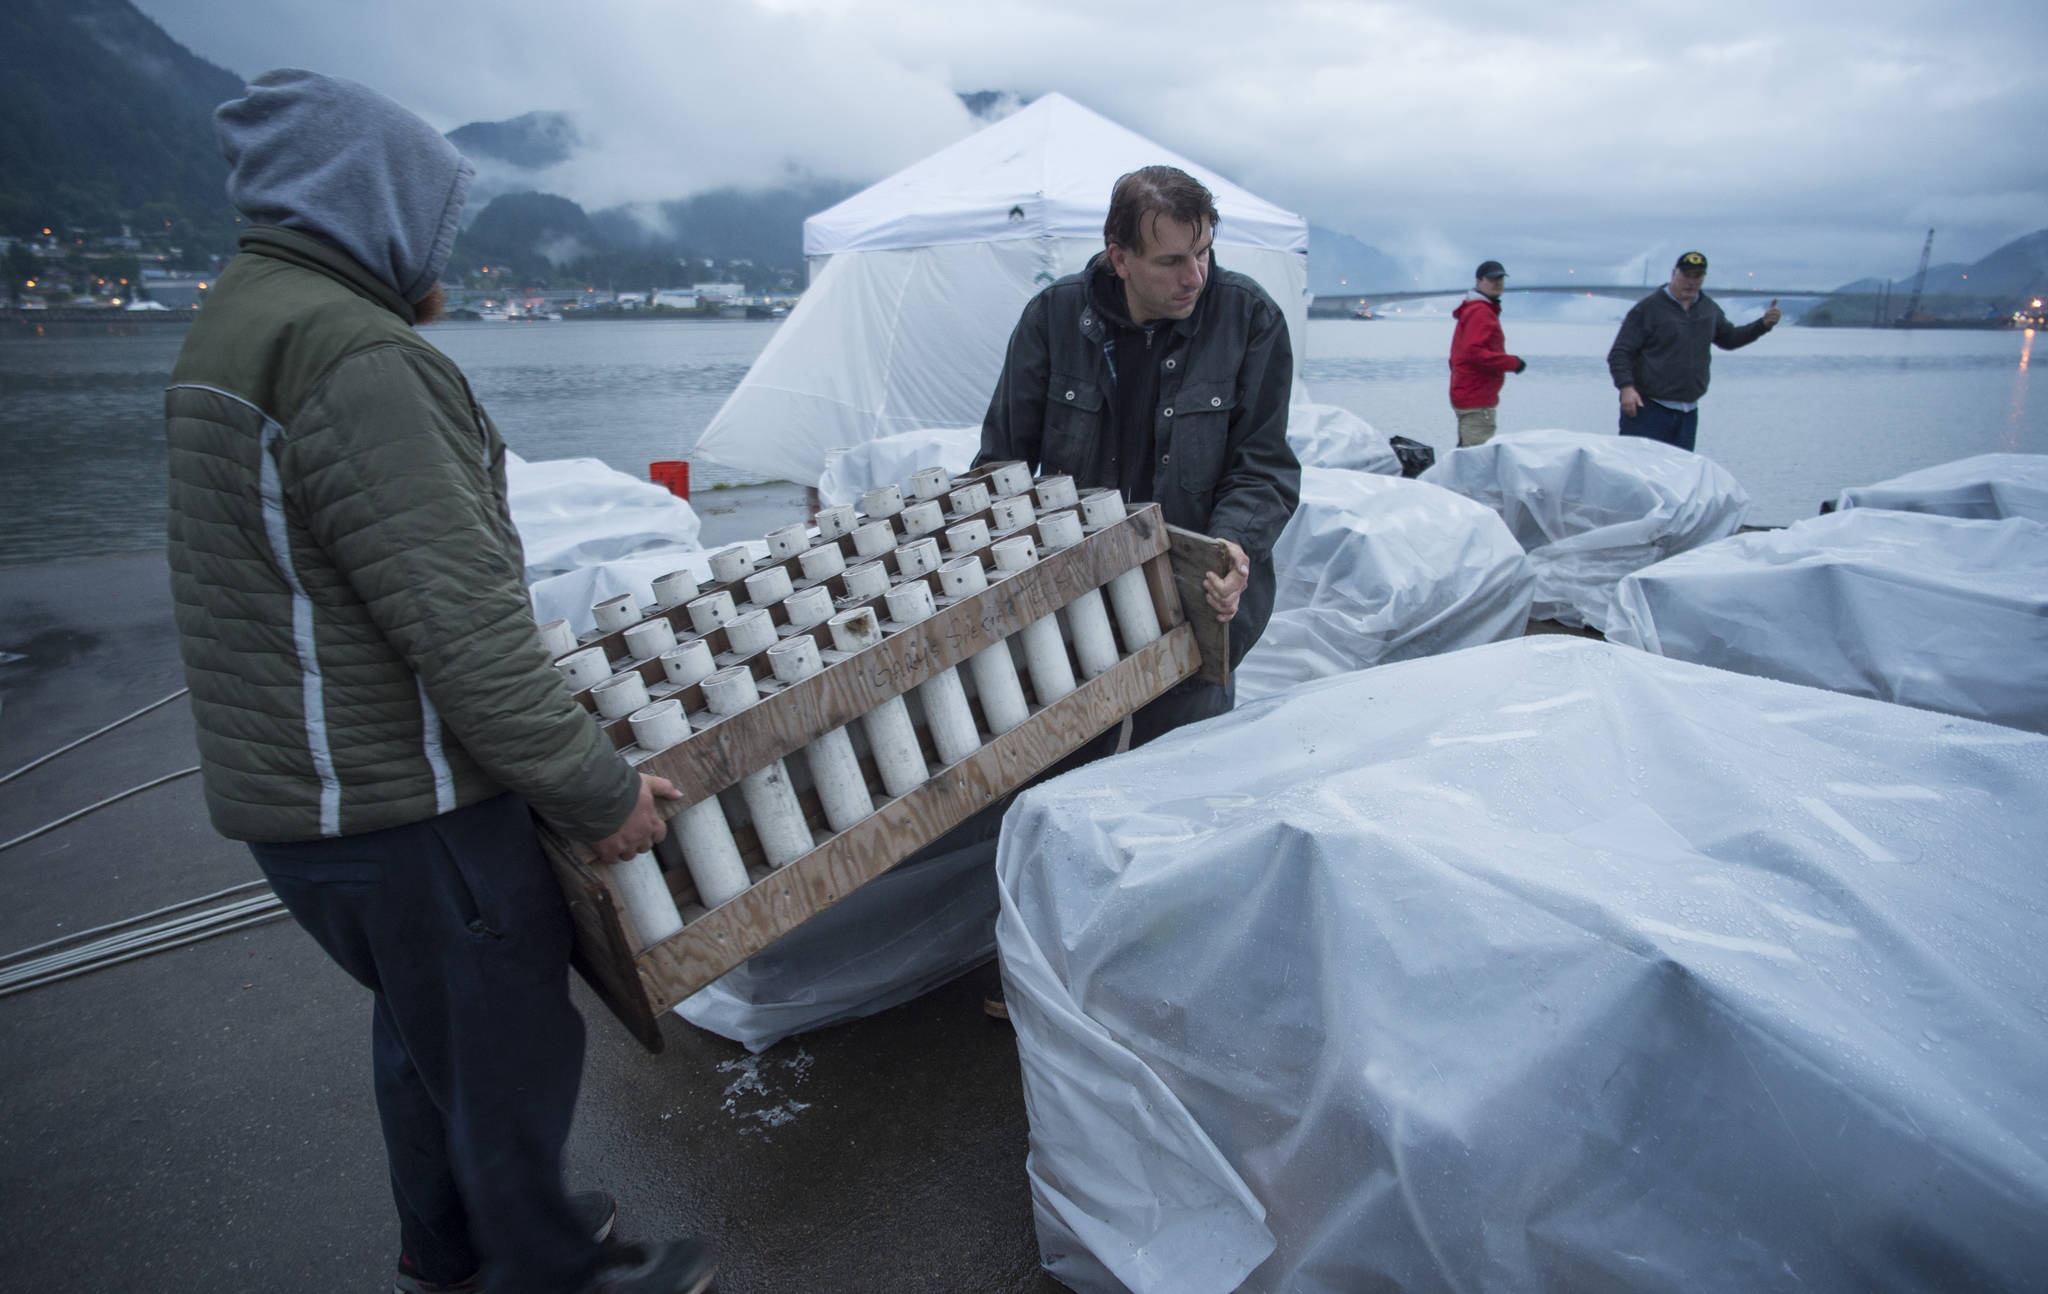 Volunteers Sam Cartmill, left, and Ian Dinneford carry rocket launchers into place before the annual city-funded fireworks show in Juneau’s downtown harbor on Tuesday, July 3, 2017. (Michael Penn | Juneau Empire)